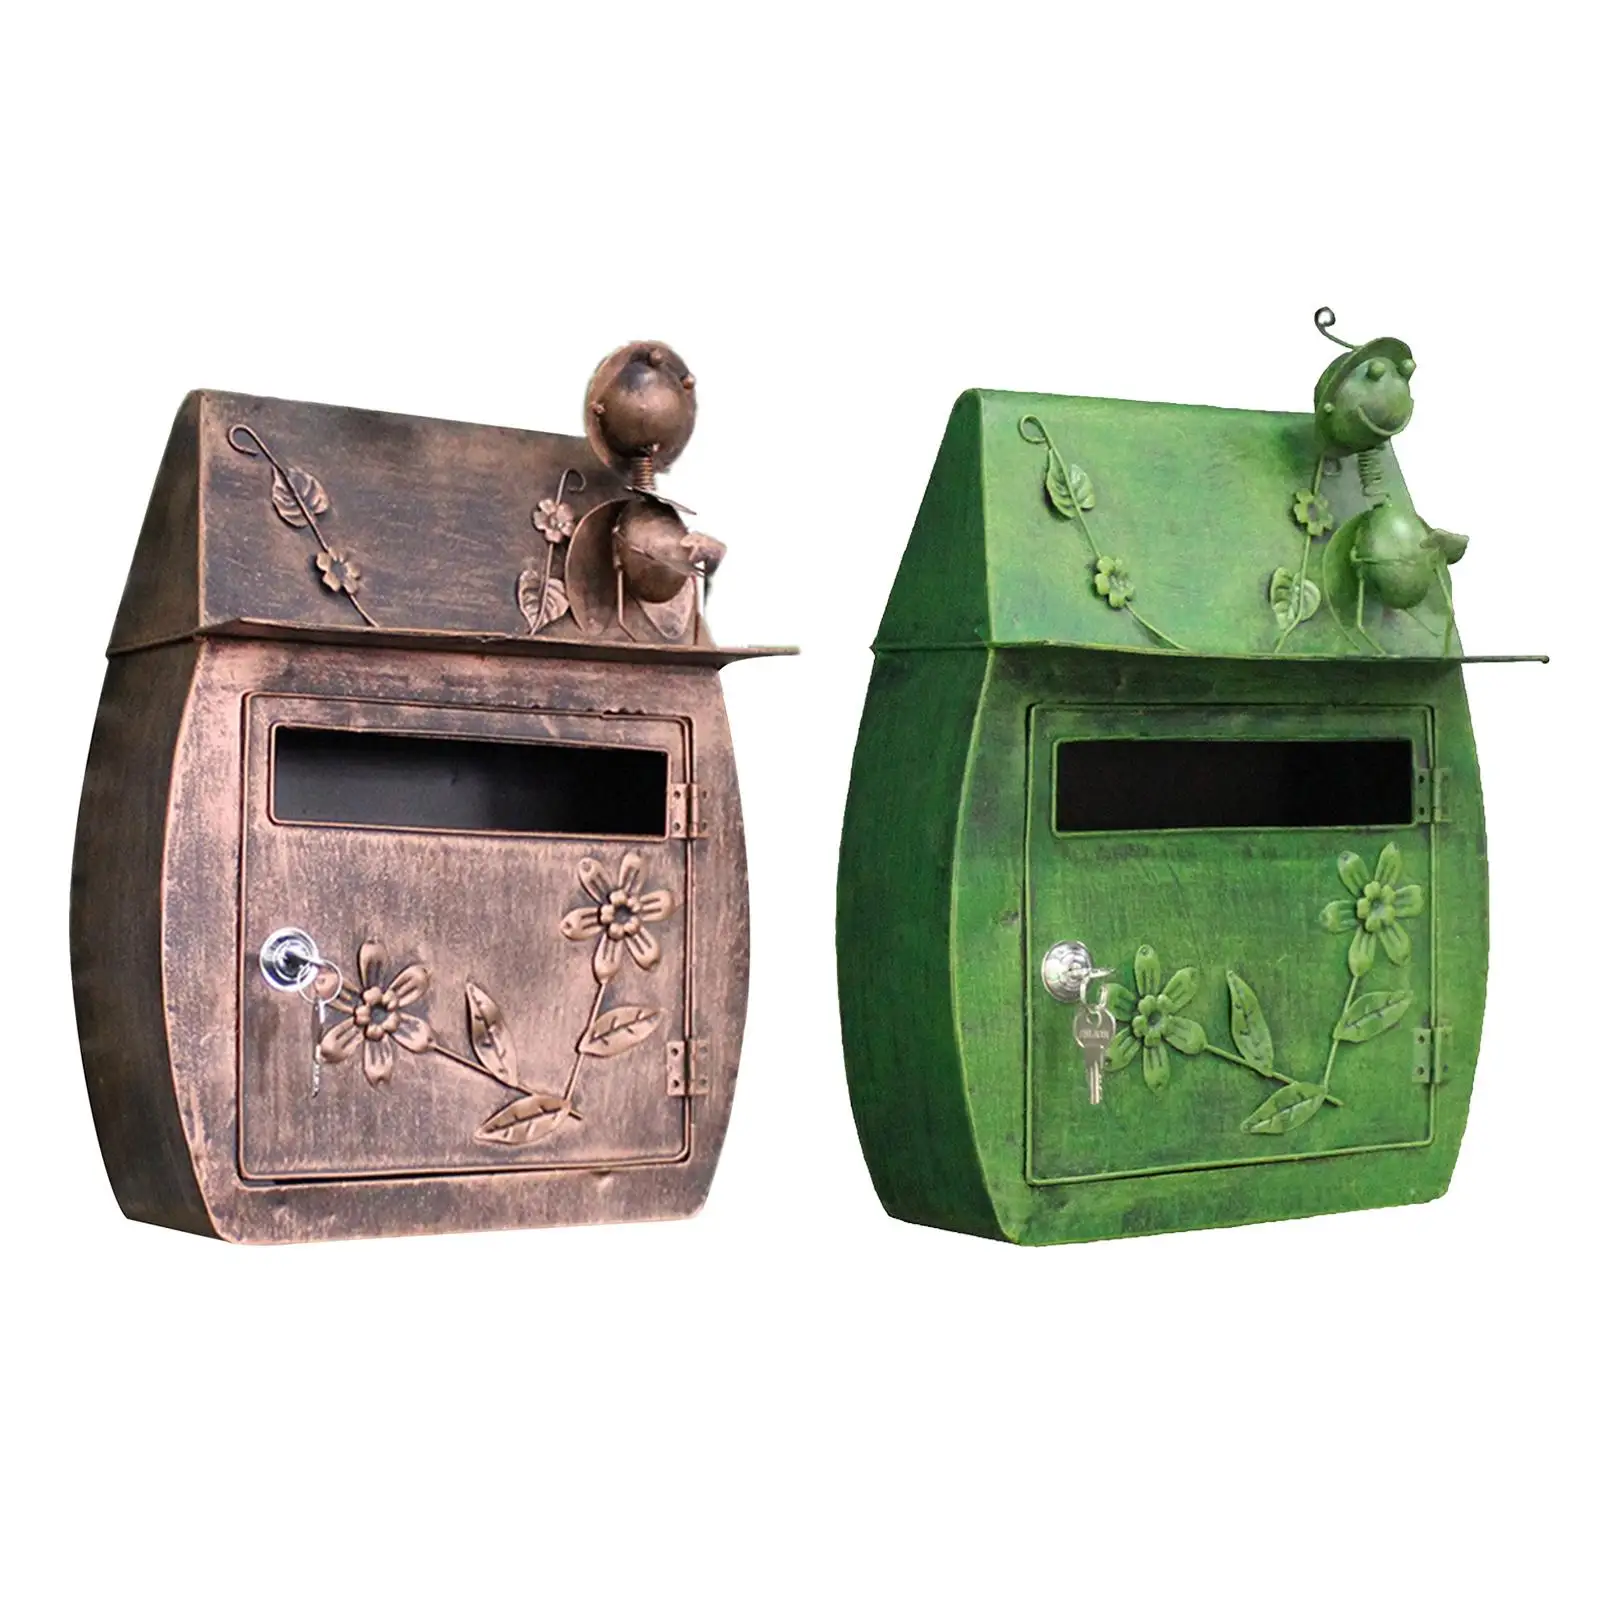 Wall Mount Mailbox Locking Large Retro Outdoor Metal Vertical Letter Box